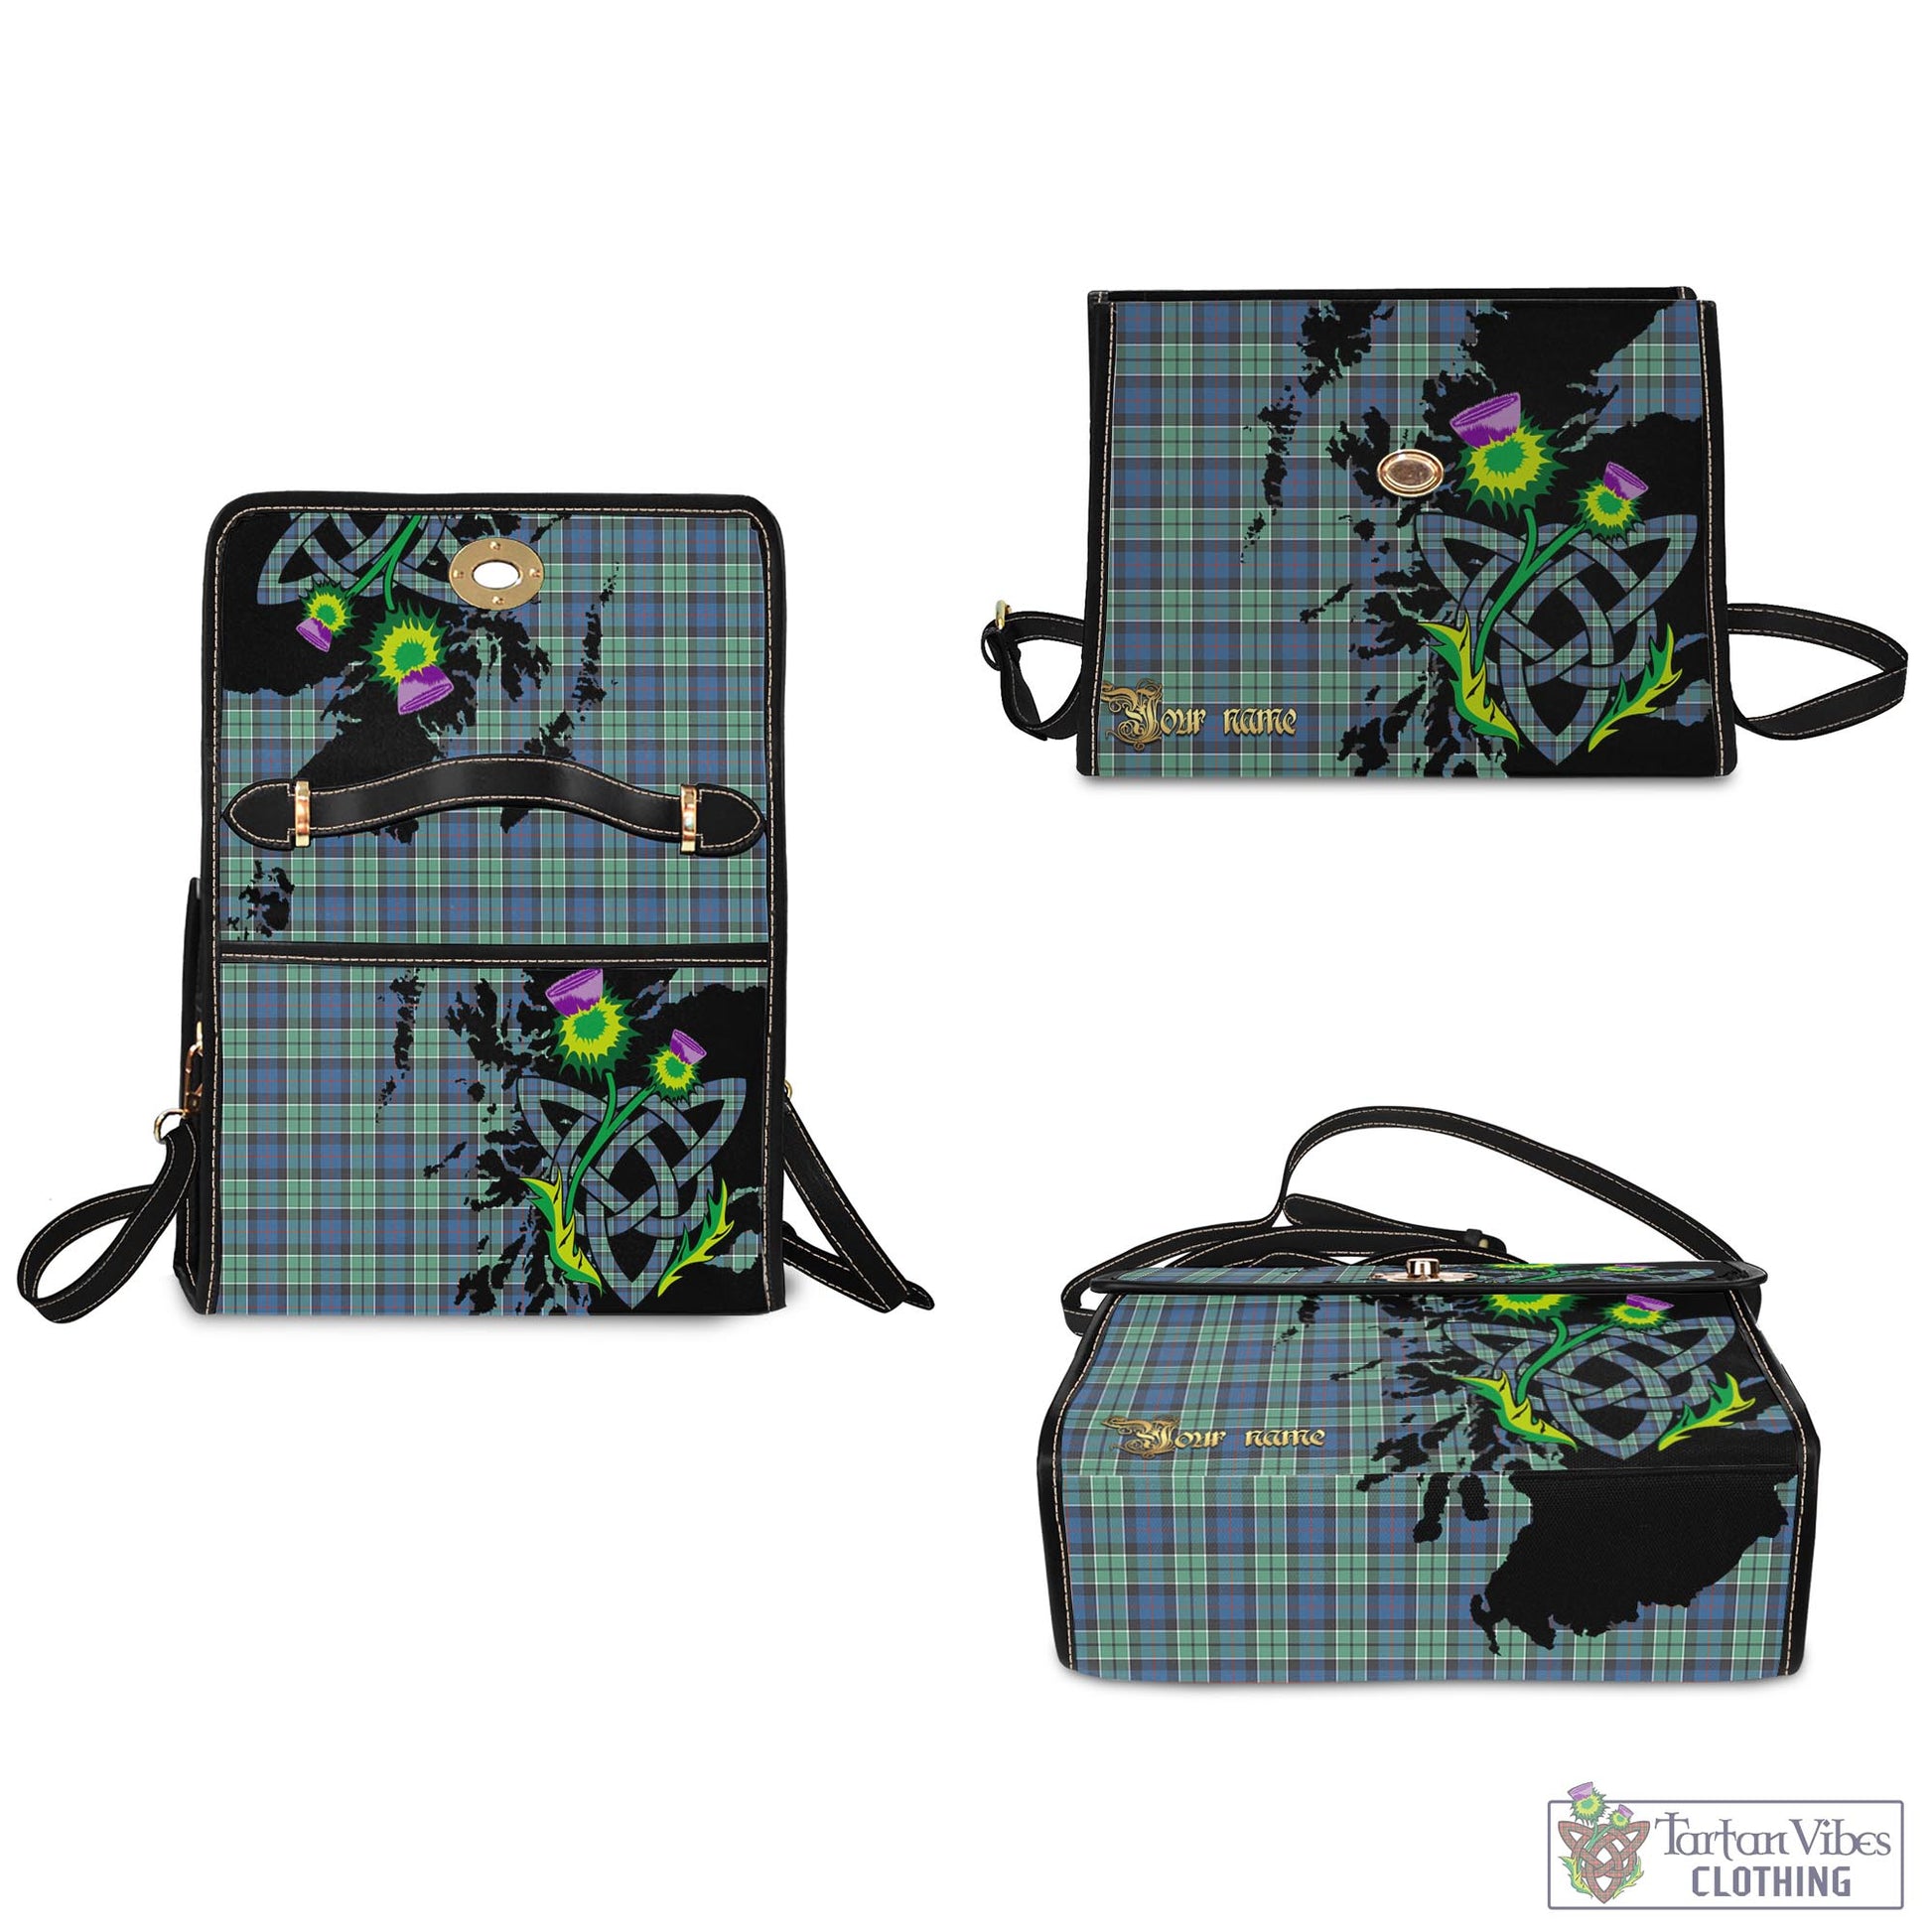 Tartan Vibes Clothing Leslie Hunting Ancient Tartan Waterproof Canvas Bag with Scotland Map and Thistle Celtic Accents